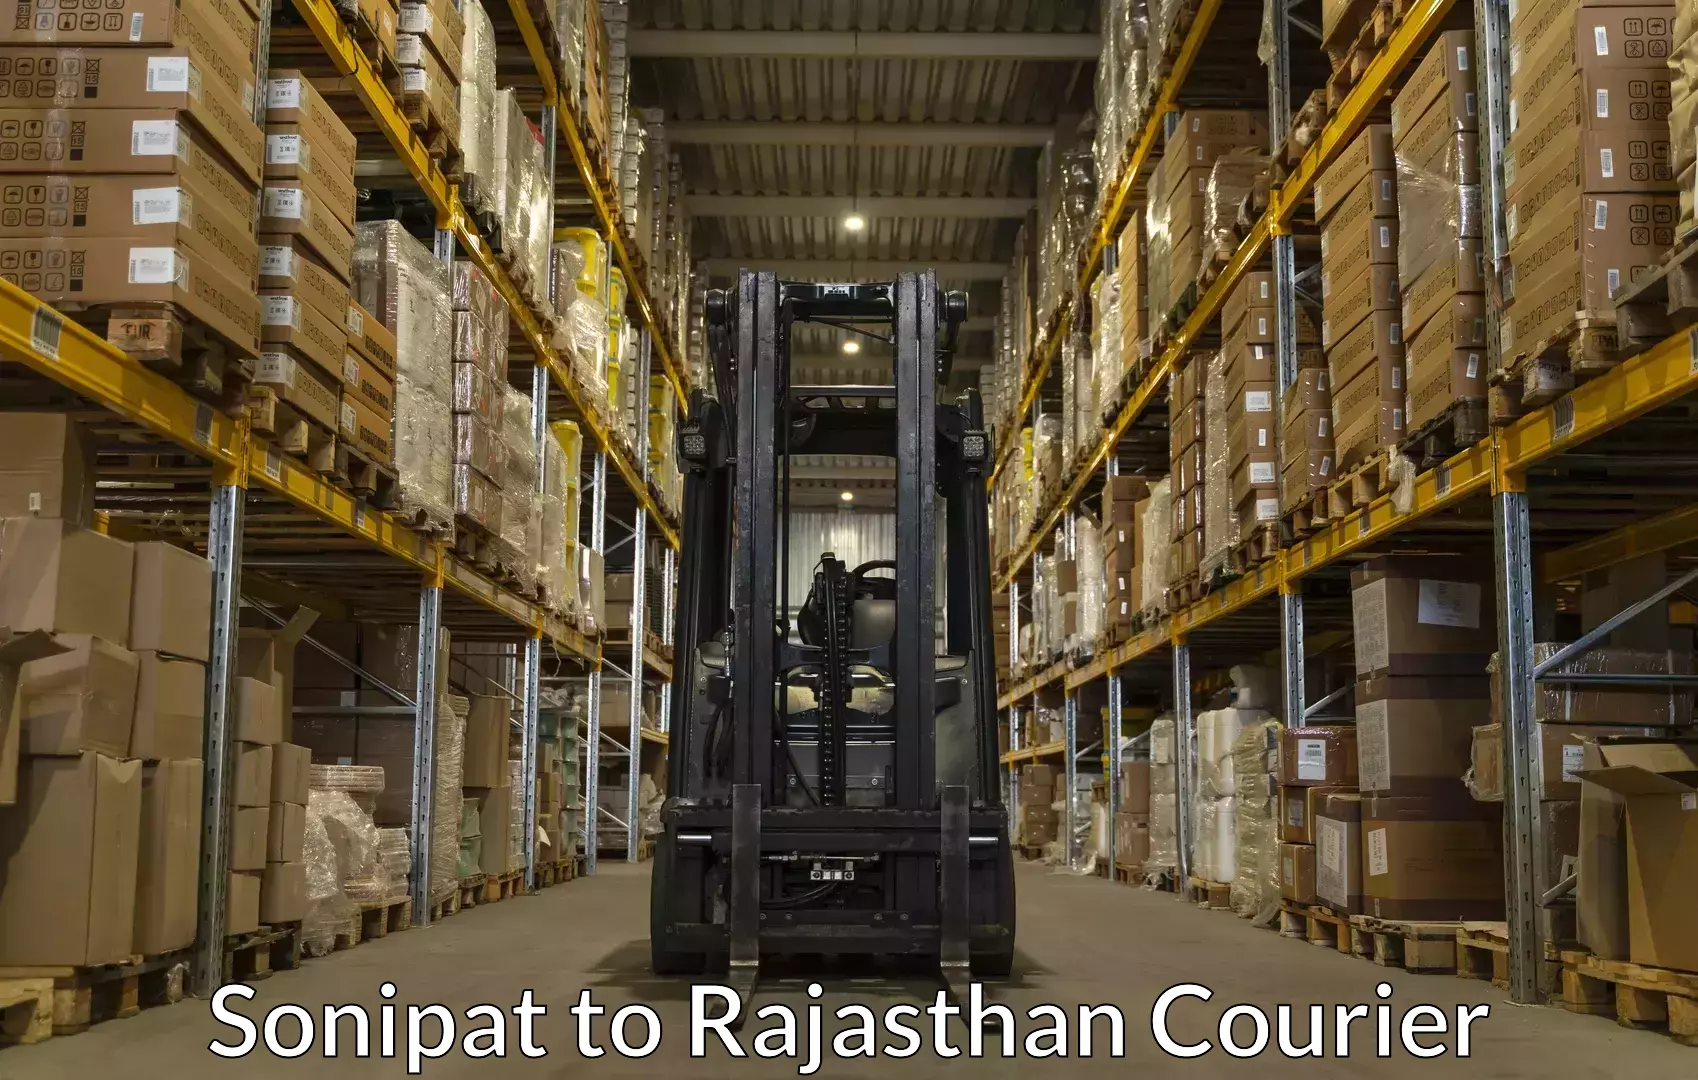 Baggage transport management Sonipat to Piparcity